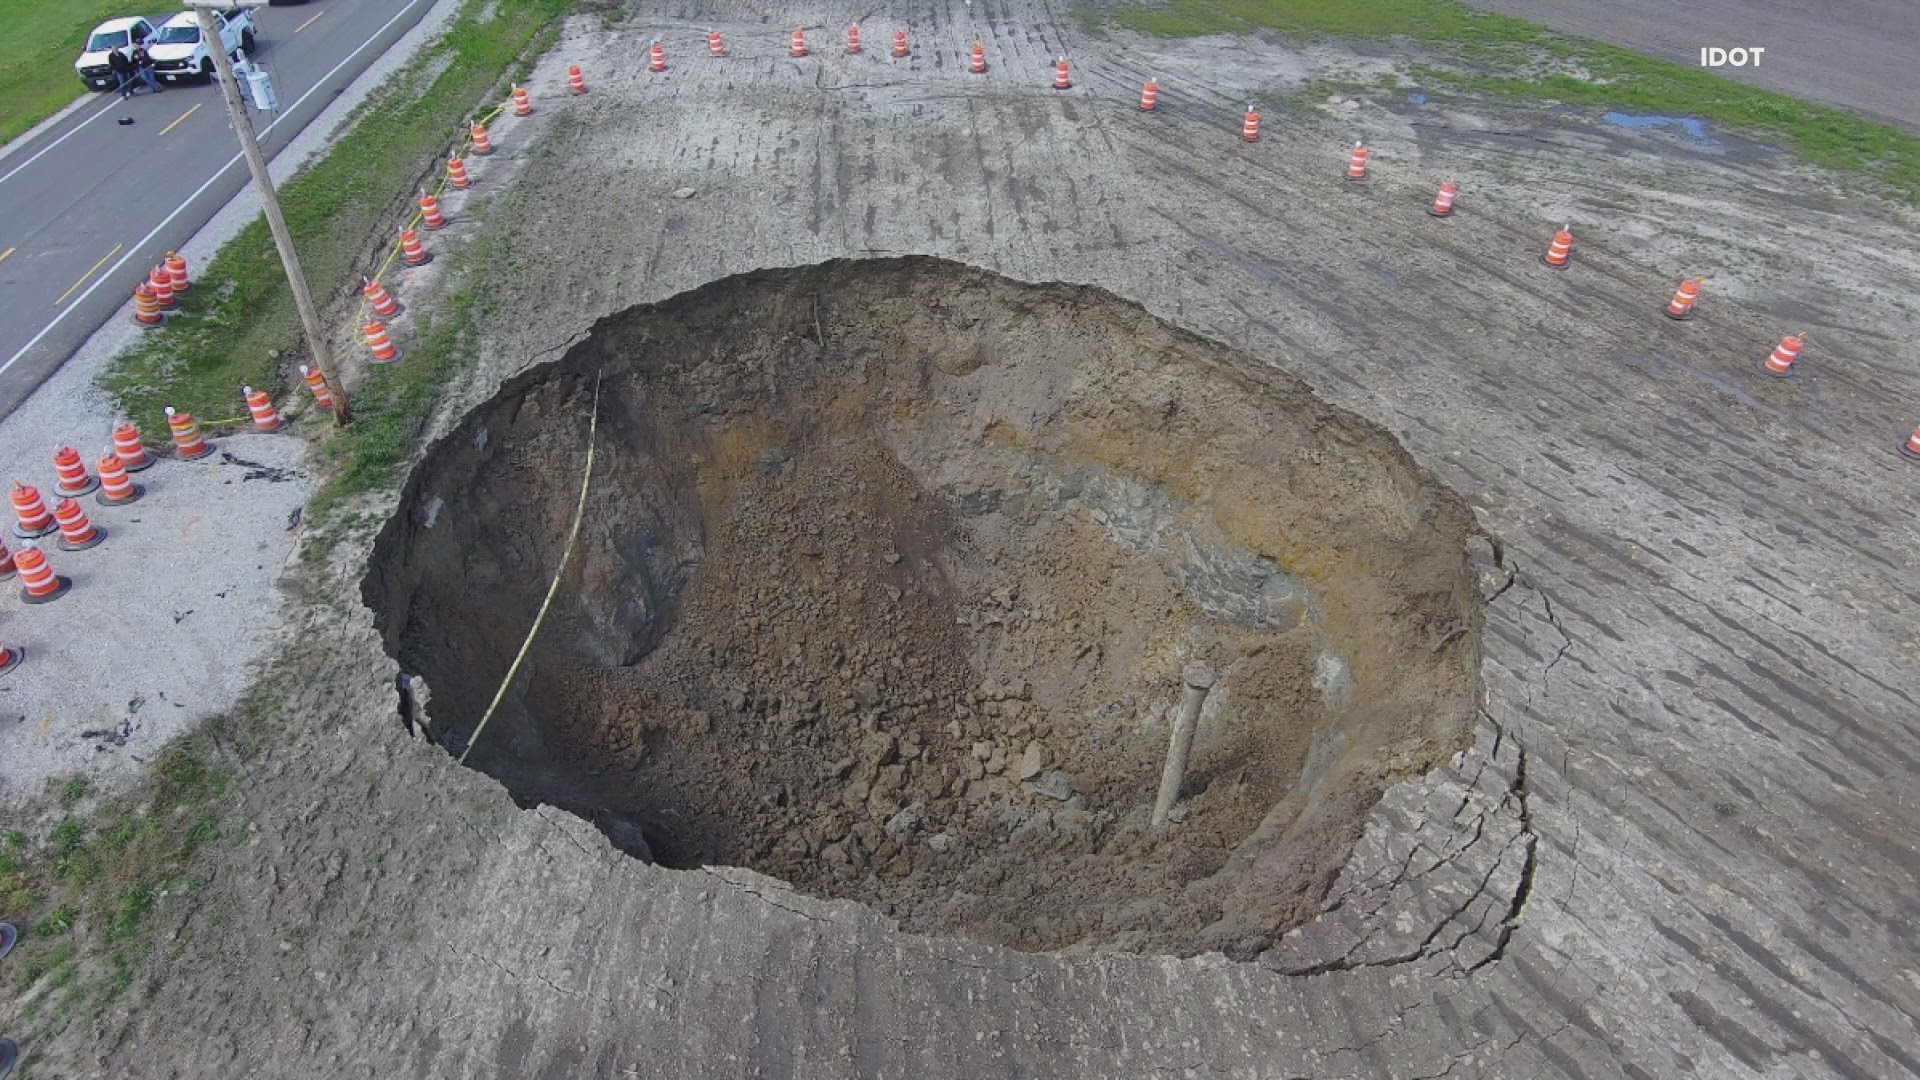 A giant sinkhole discovered in southern Illinois may threaten the integrity of a nearby road. It was first discovered on Thursday near Illinois Route 185.